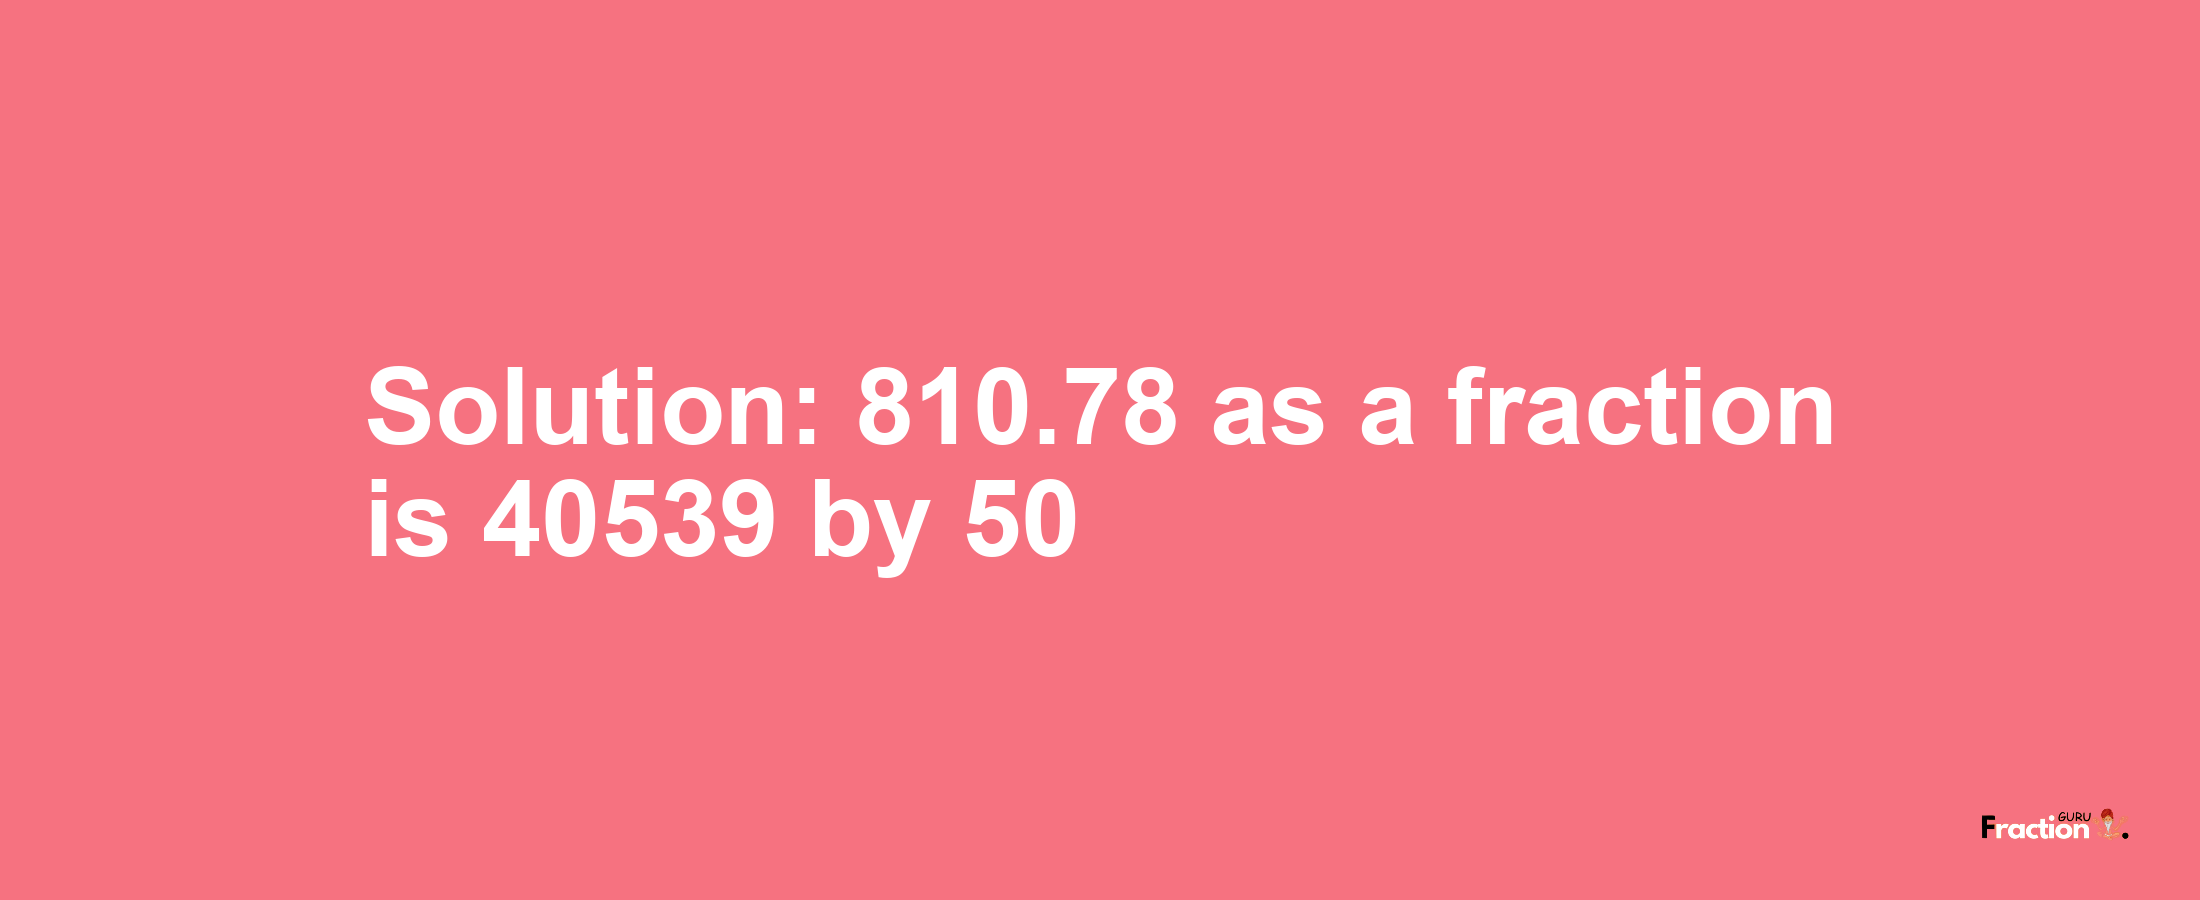 Solution:810.78 as a fraction is 40539/50